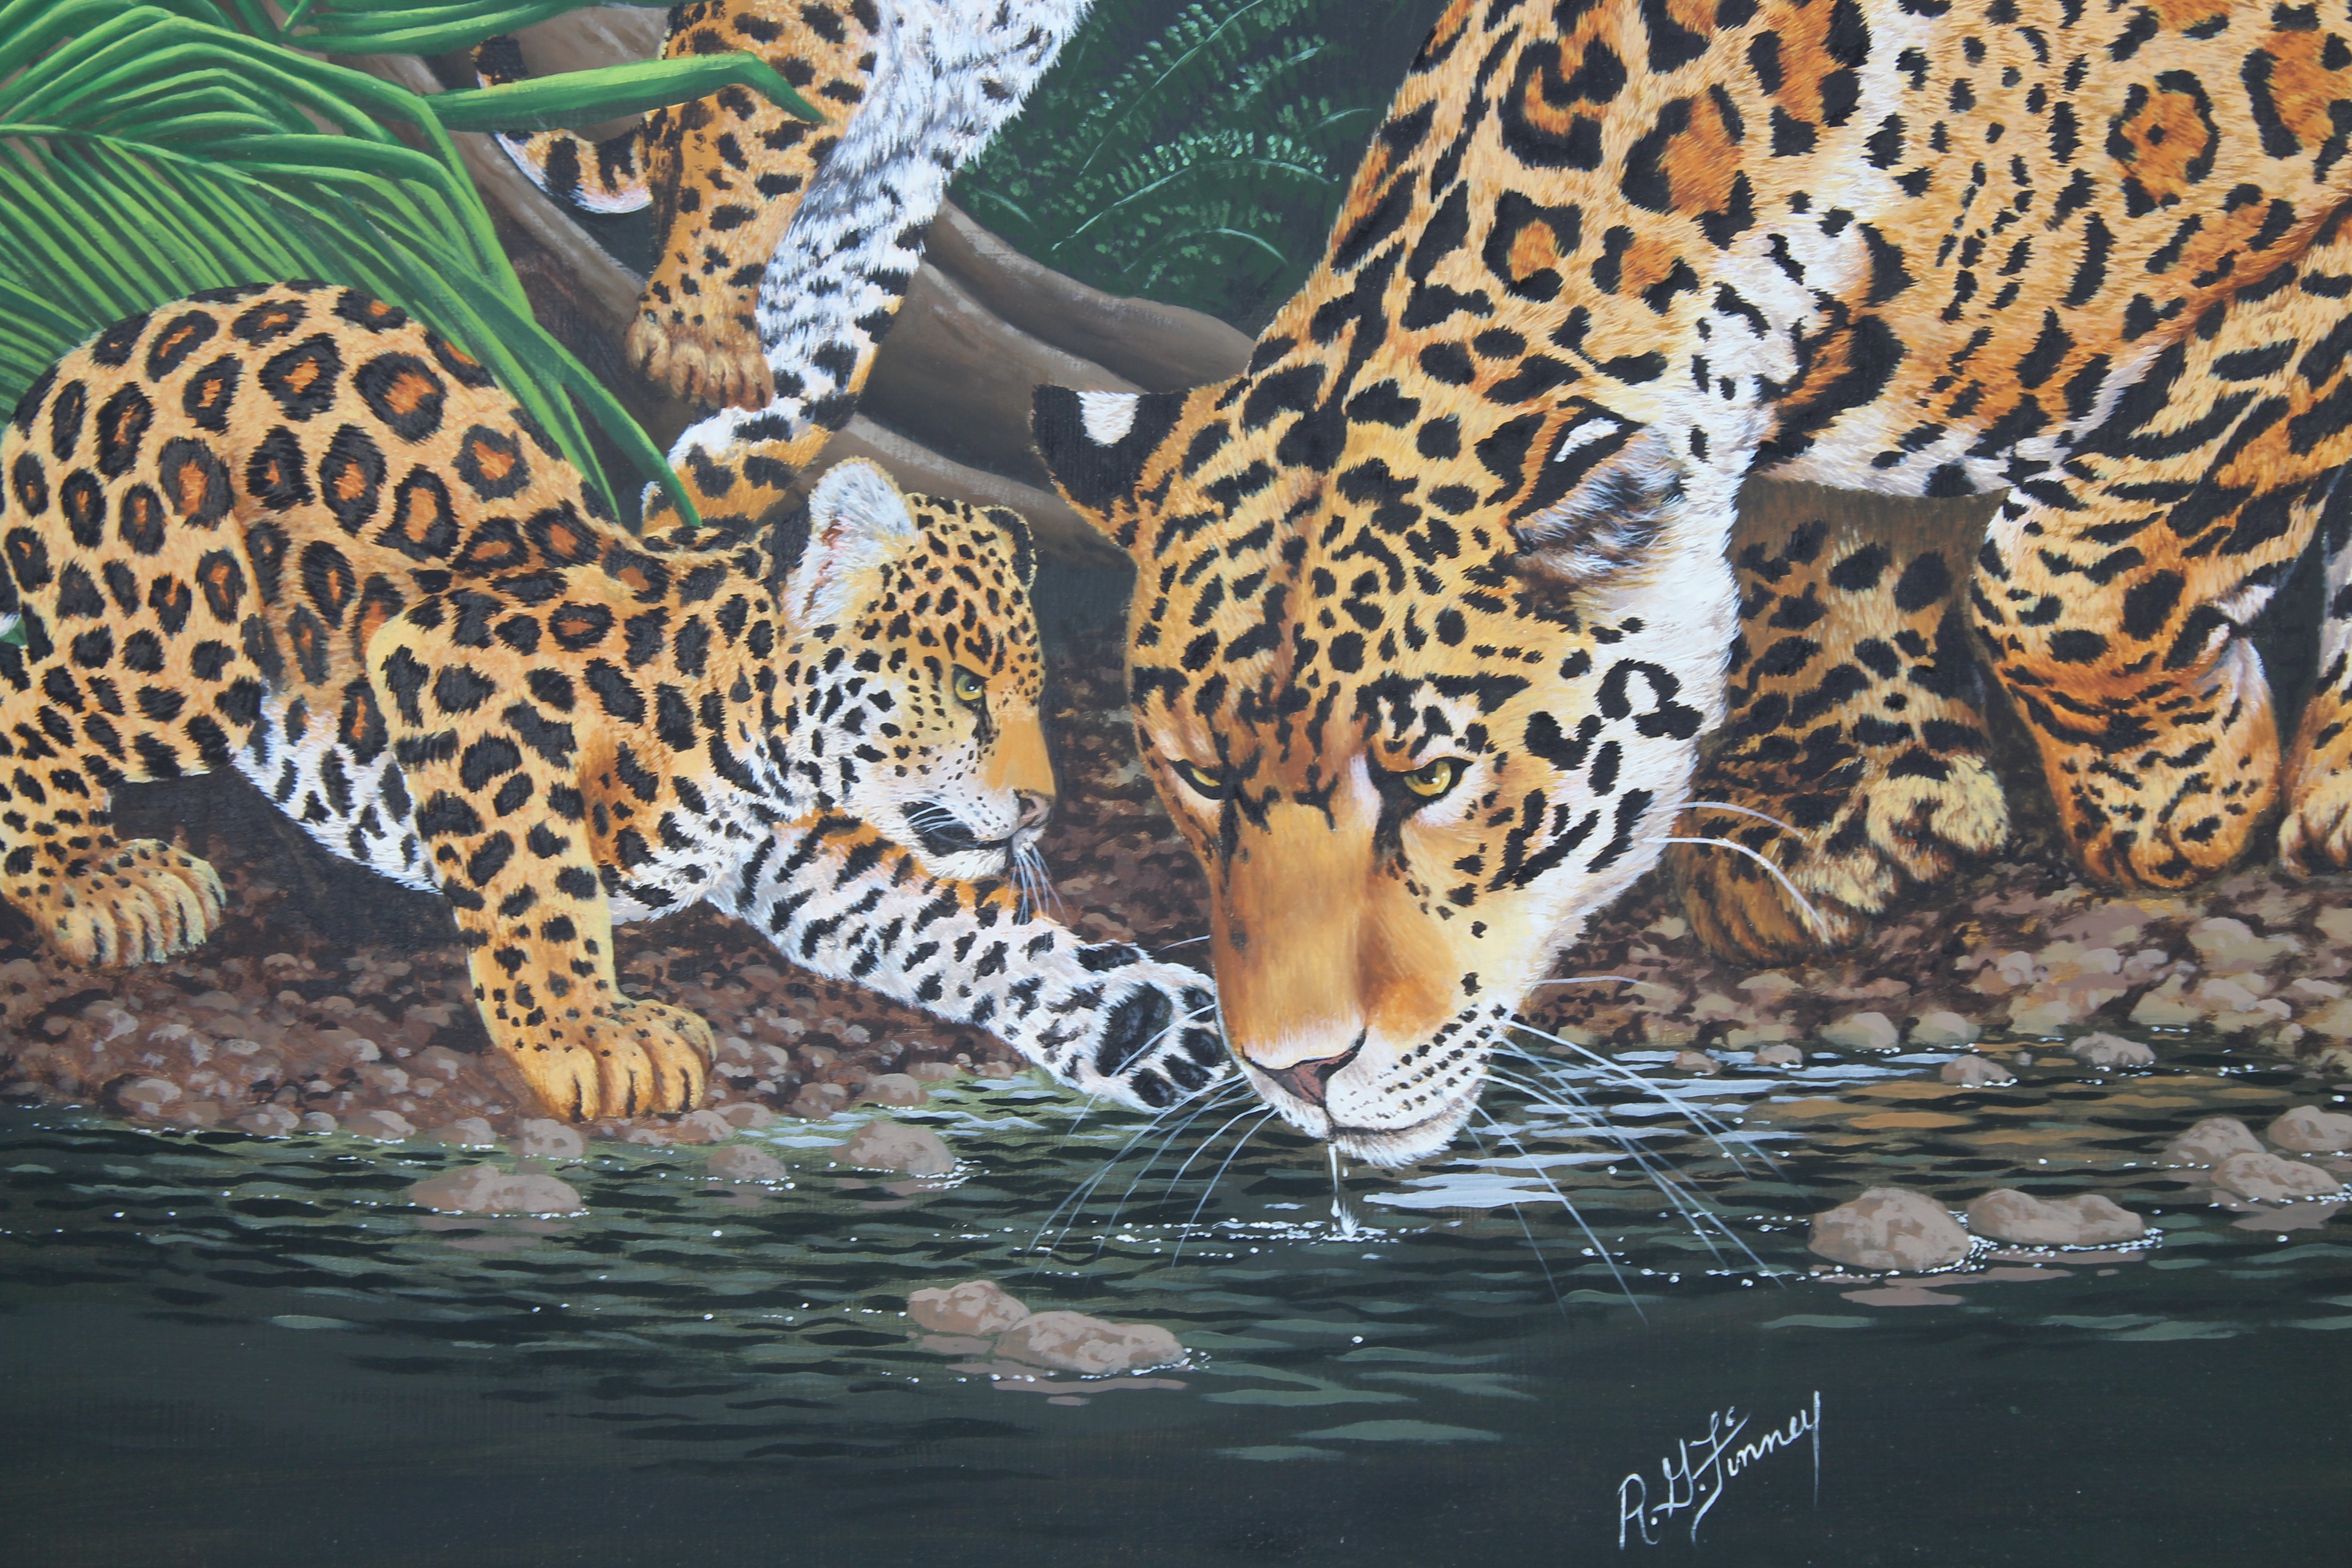 R.G. Finney (B. 1941) "Jaguar and Cubs" - Image 2 of 3